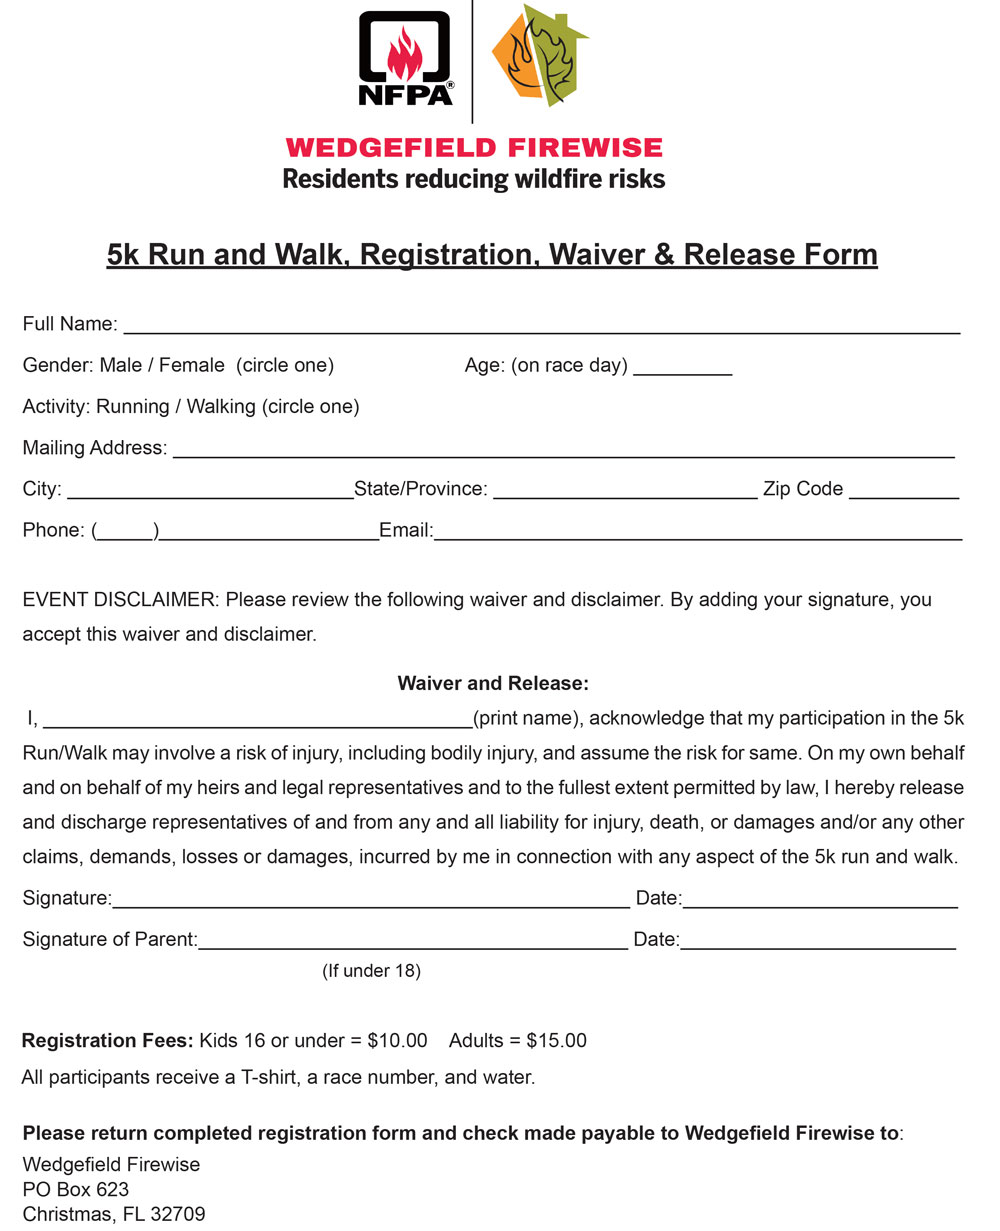 Firewise 5K Run and Walk, Registration, Waiver & Release Form